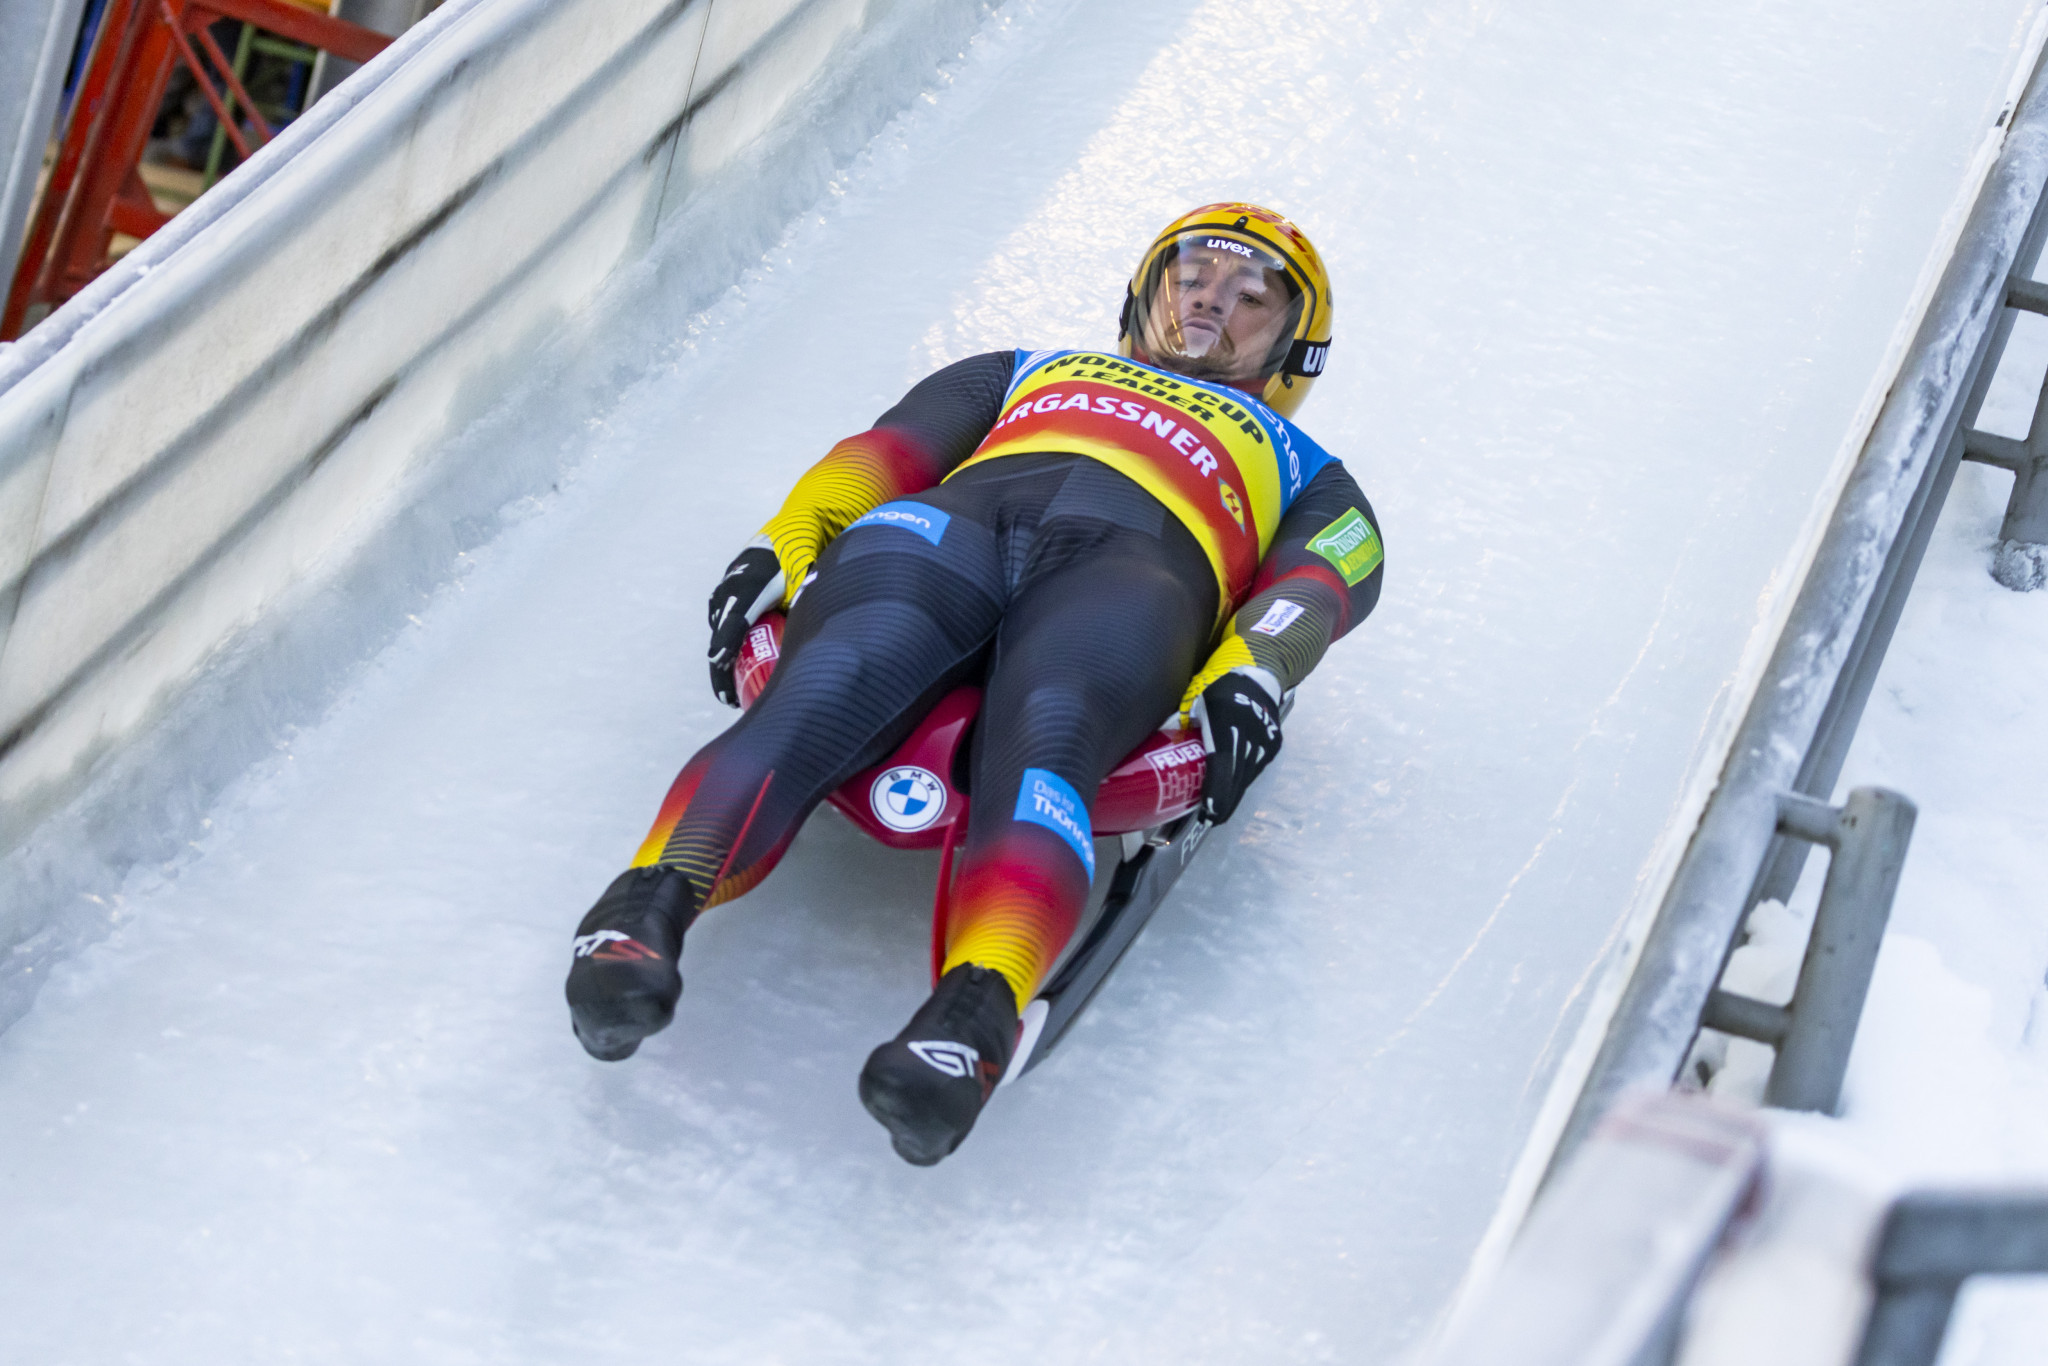 Johannes Ludwig claimed his fourth win of the FIL Luge World Cup season ©Getty Images